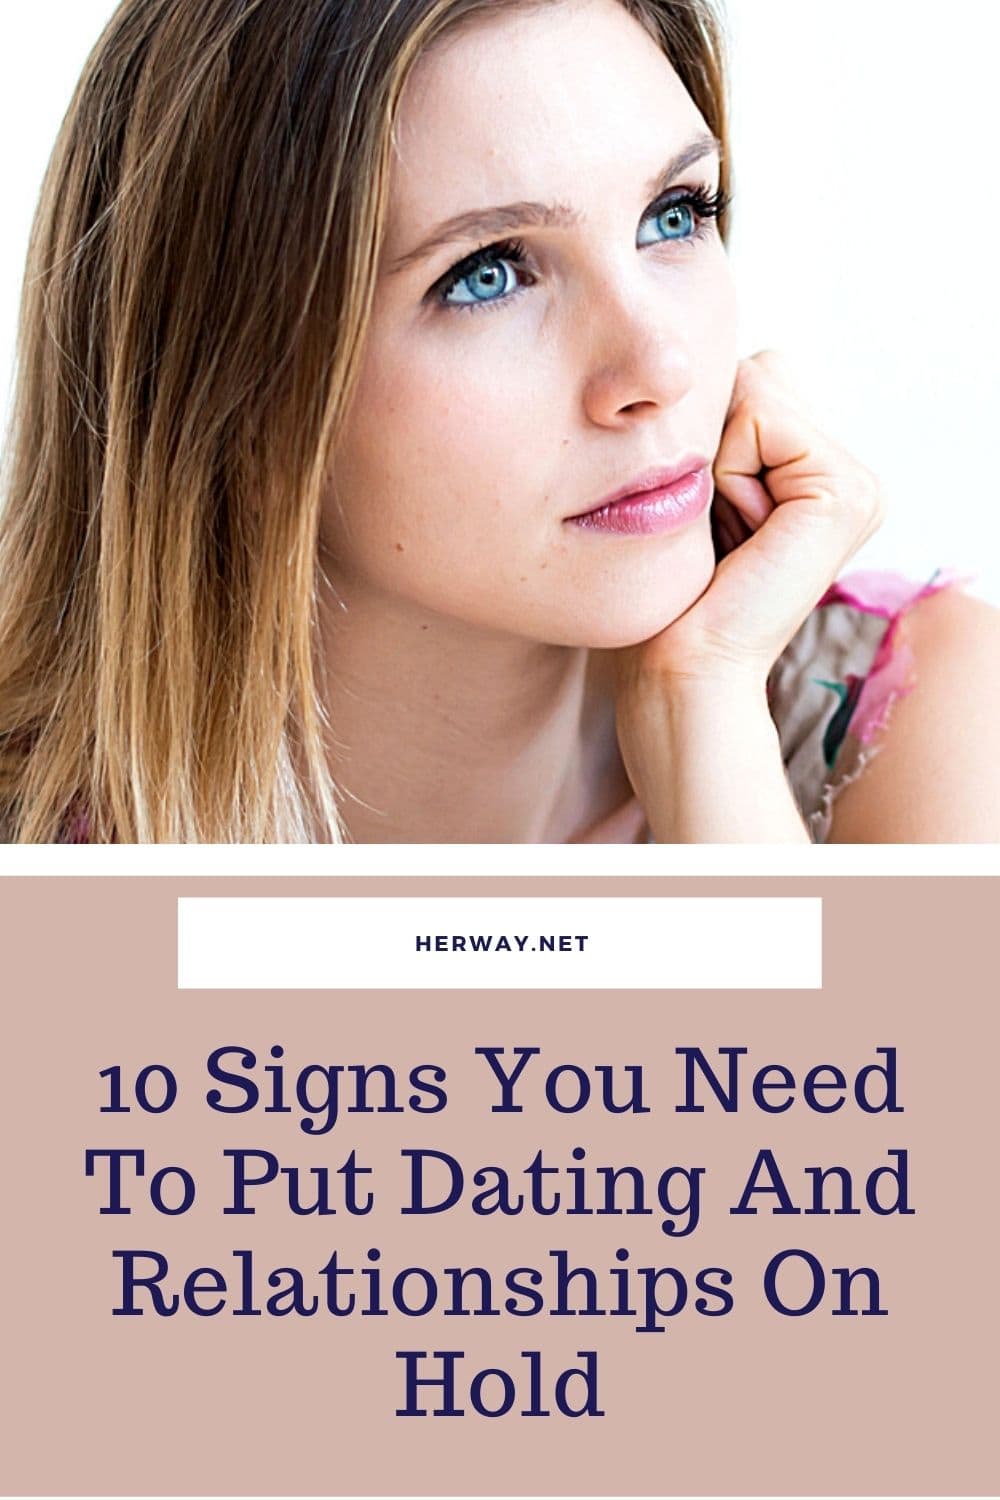 10 Signs You Need To Put Dating And Relationships On Hold